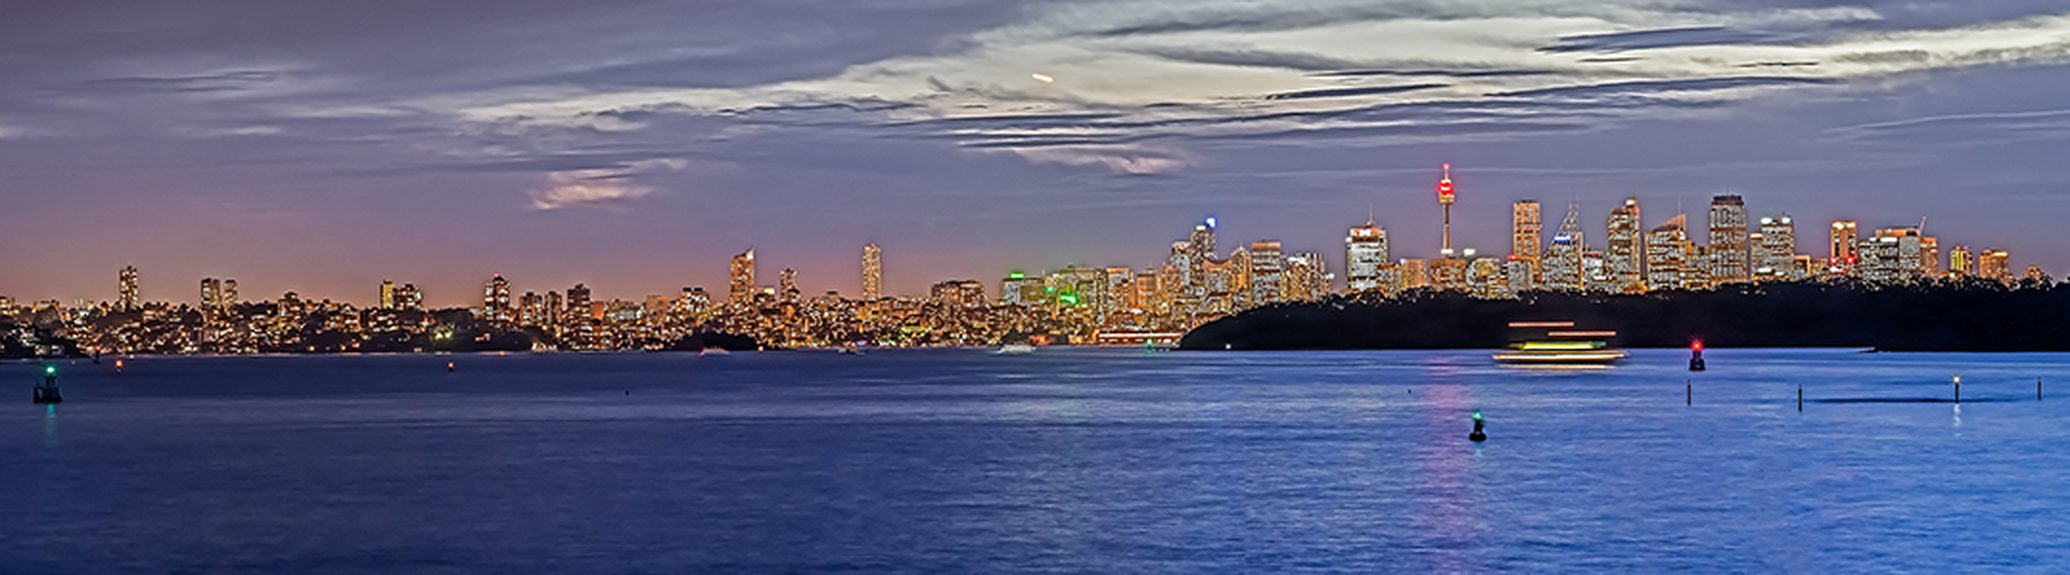 Sydney Skyline as seen from South Head. Image by Max Pemberton